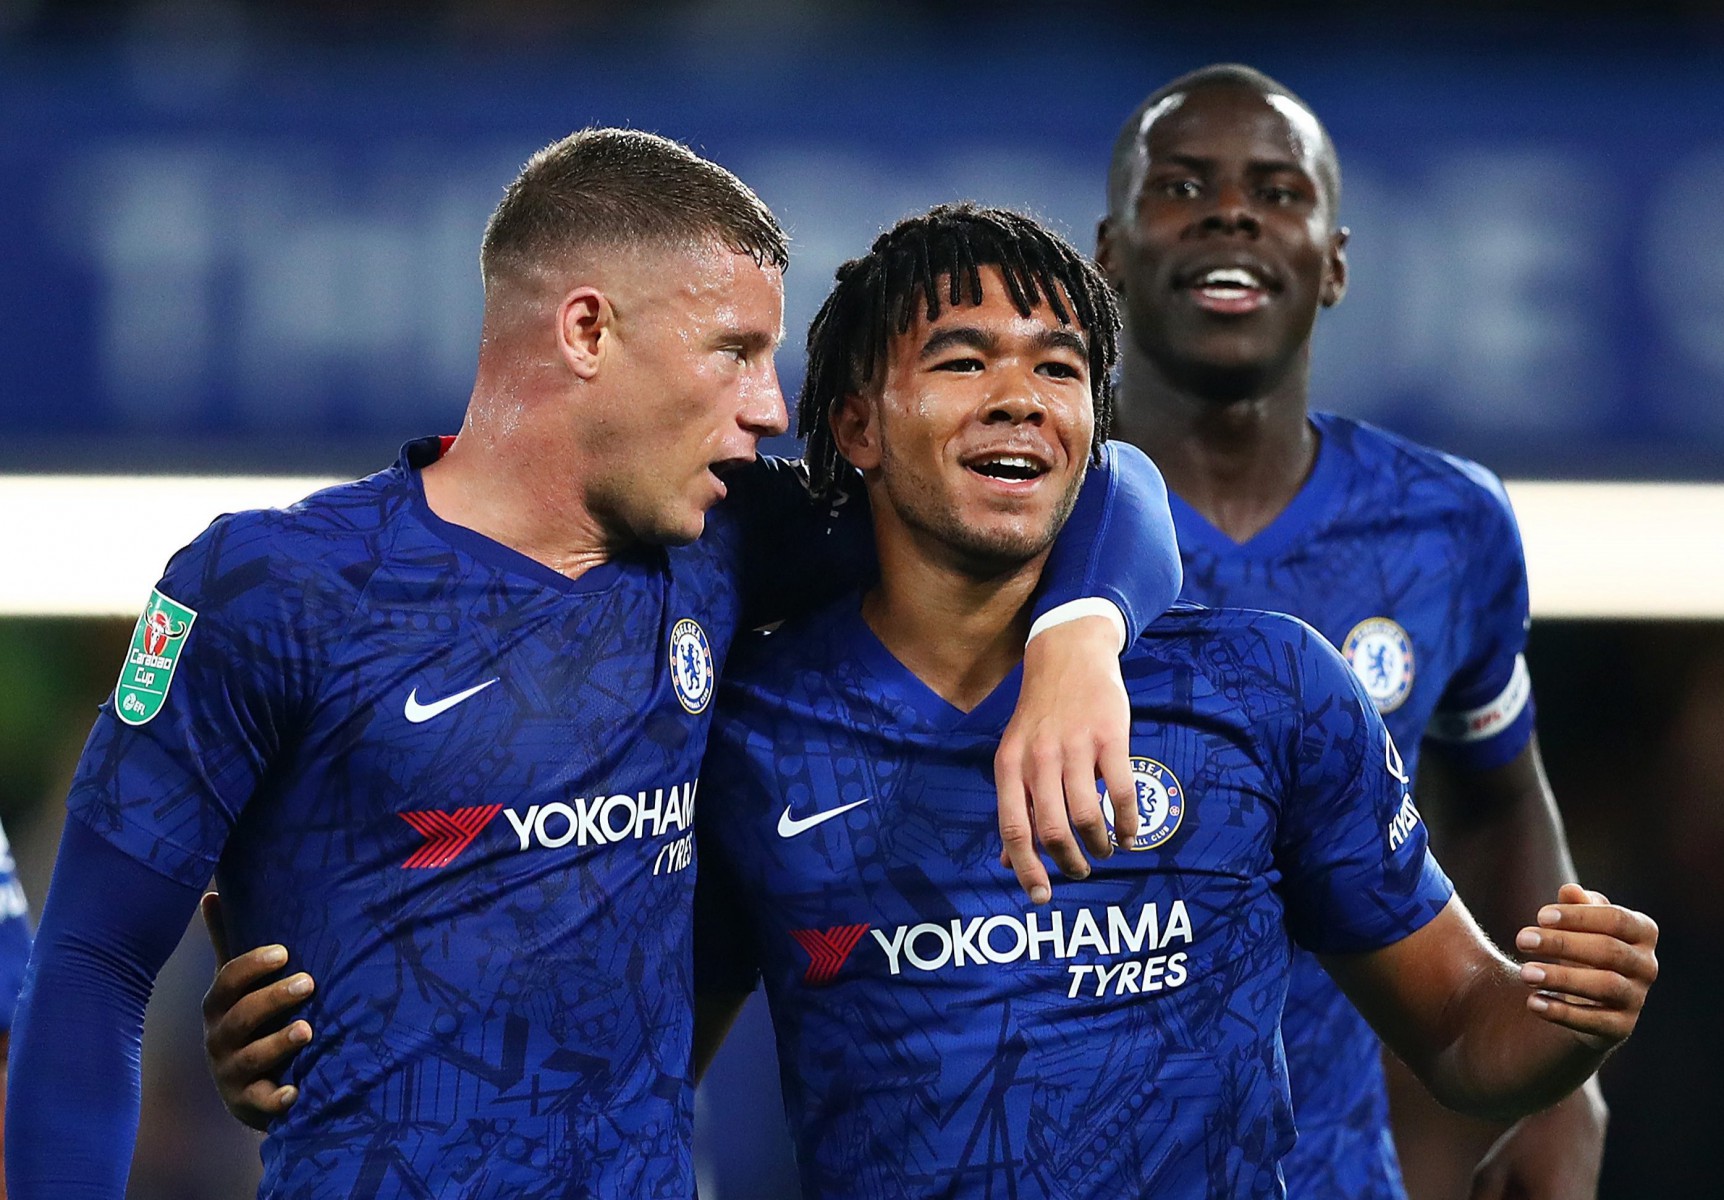 Ross Barkley and Reece James were both on the scoresheet in the last round as Chelsea thumped Grimsby 7-1